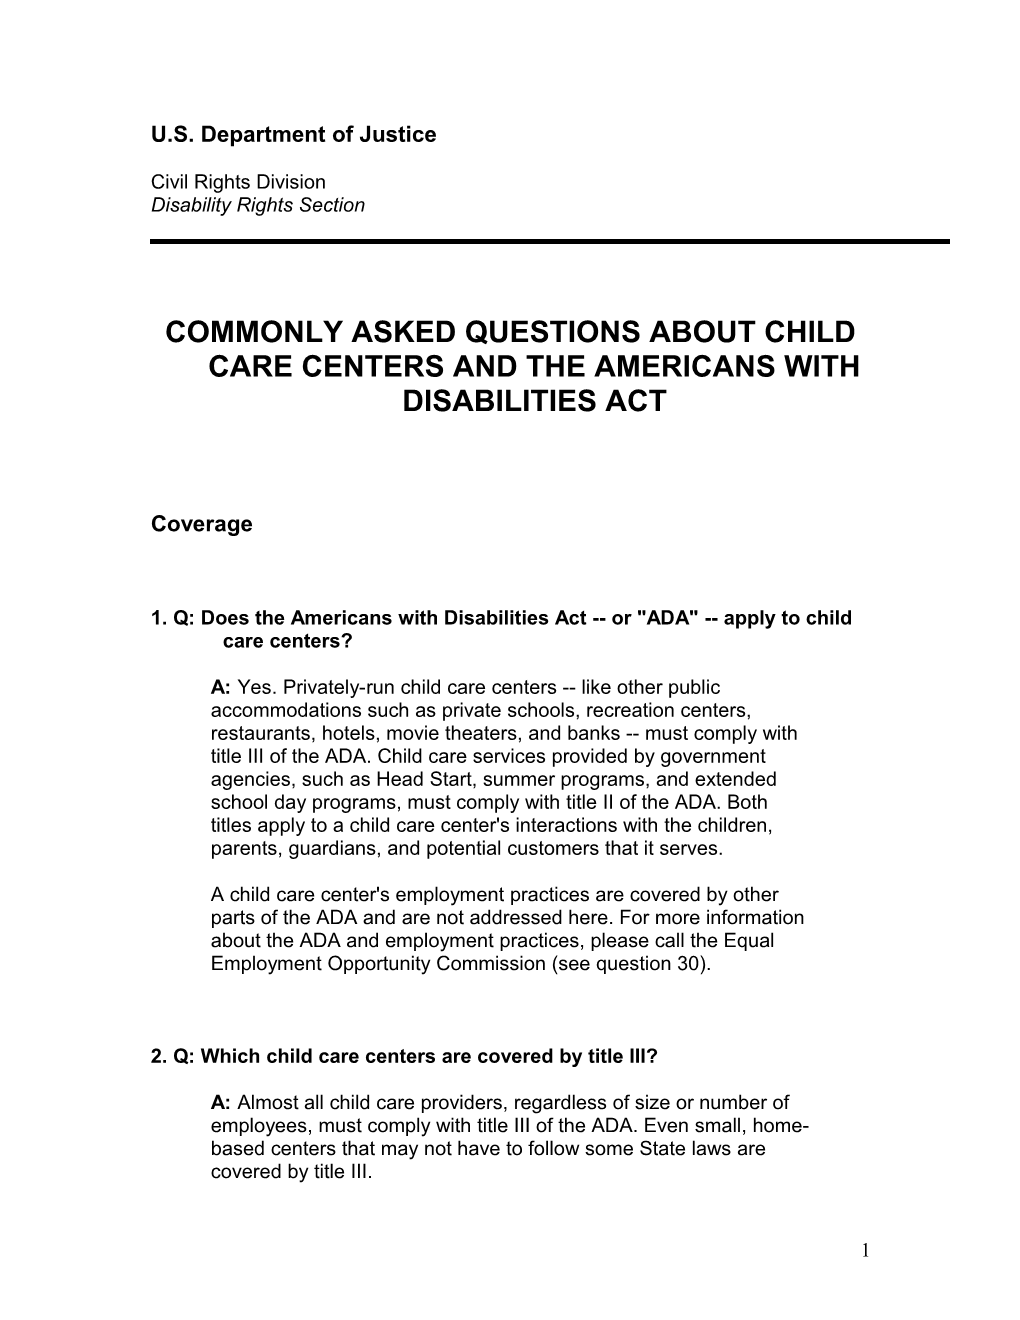 Commonly Asked Questions About Child Care Centers and the Americans with Disabilities Act